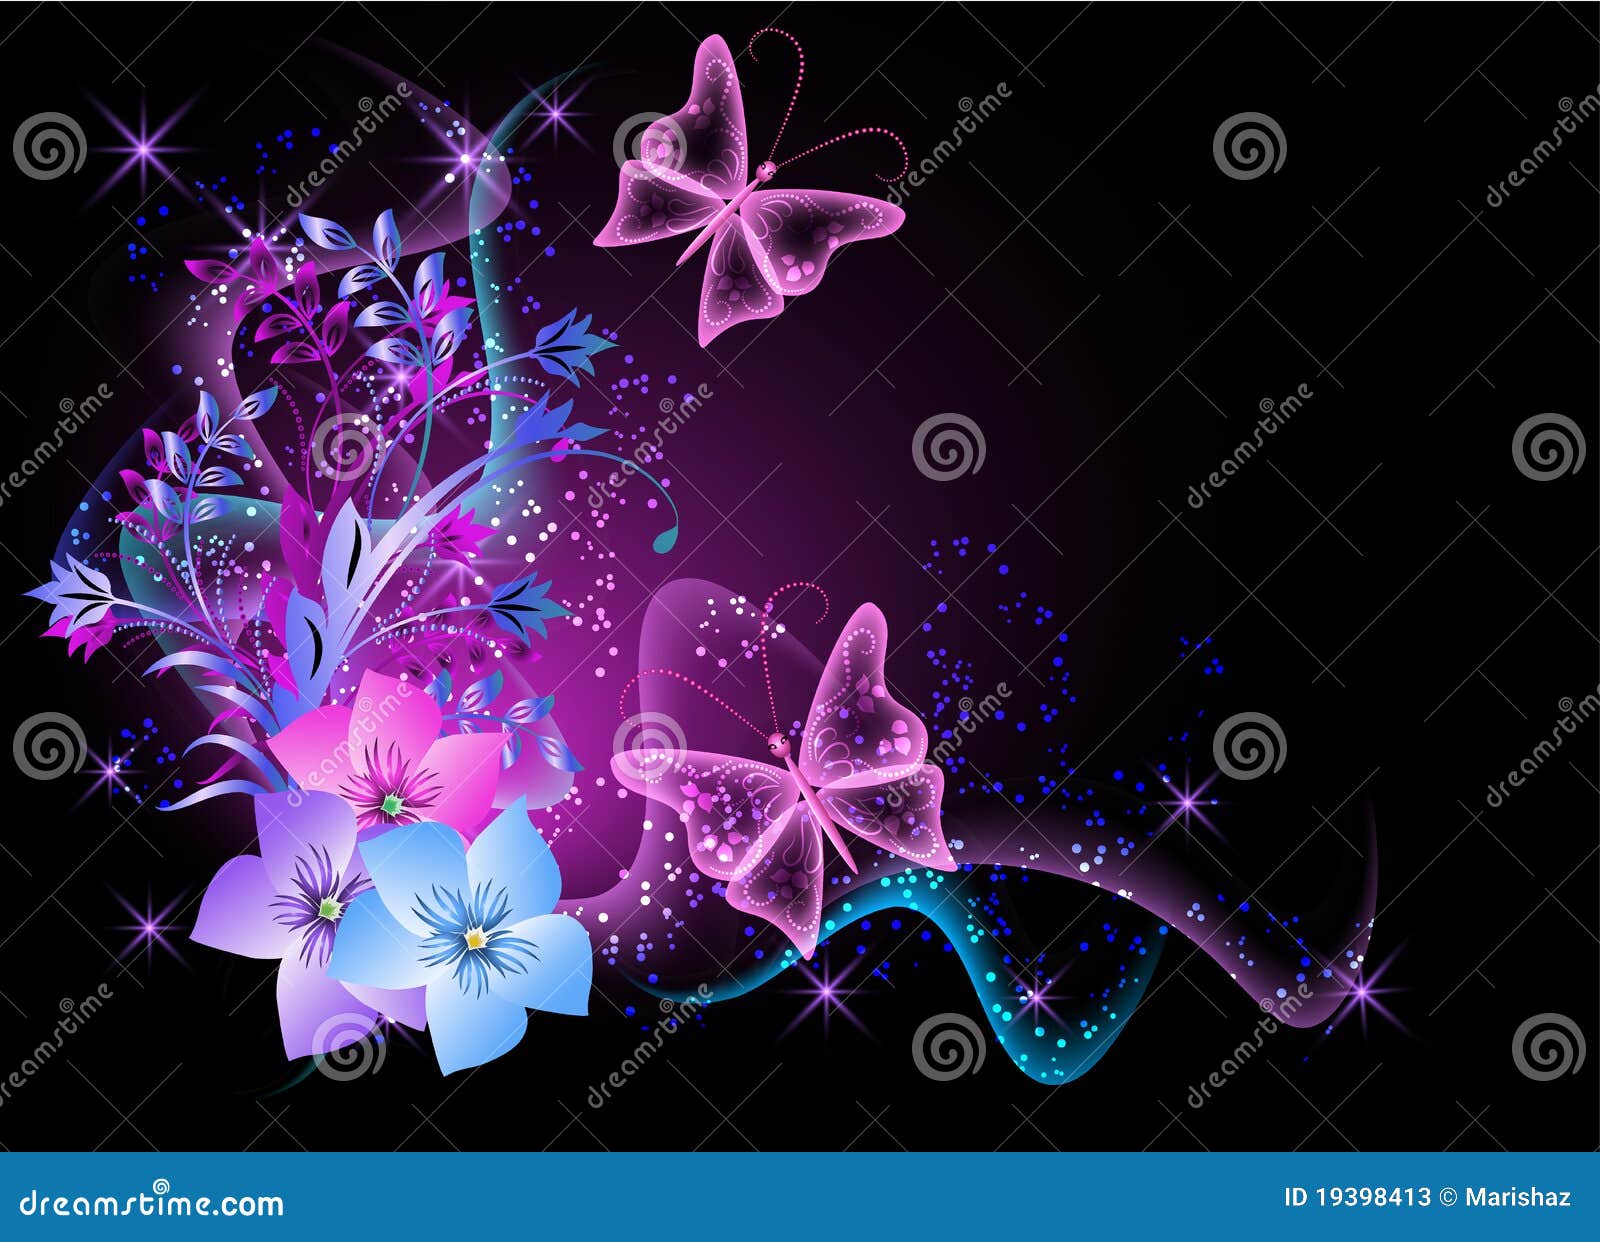 Background With Flowers, Smoke And Butterfly Stock Photos 